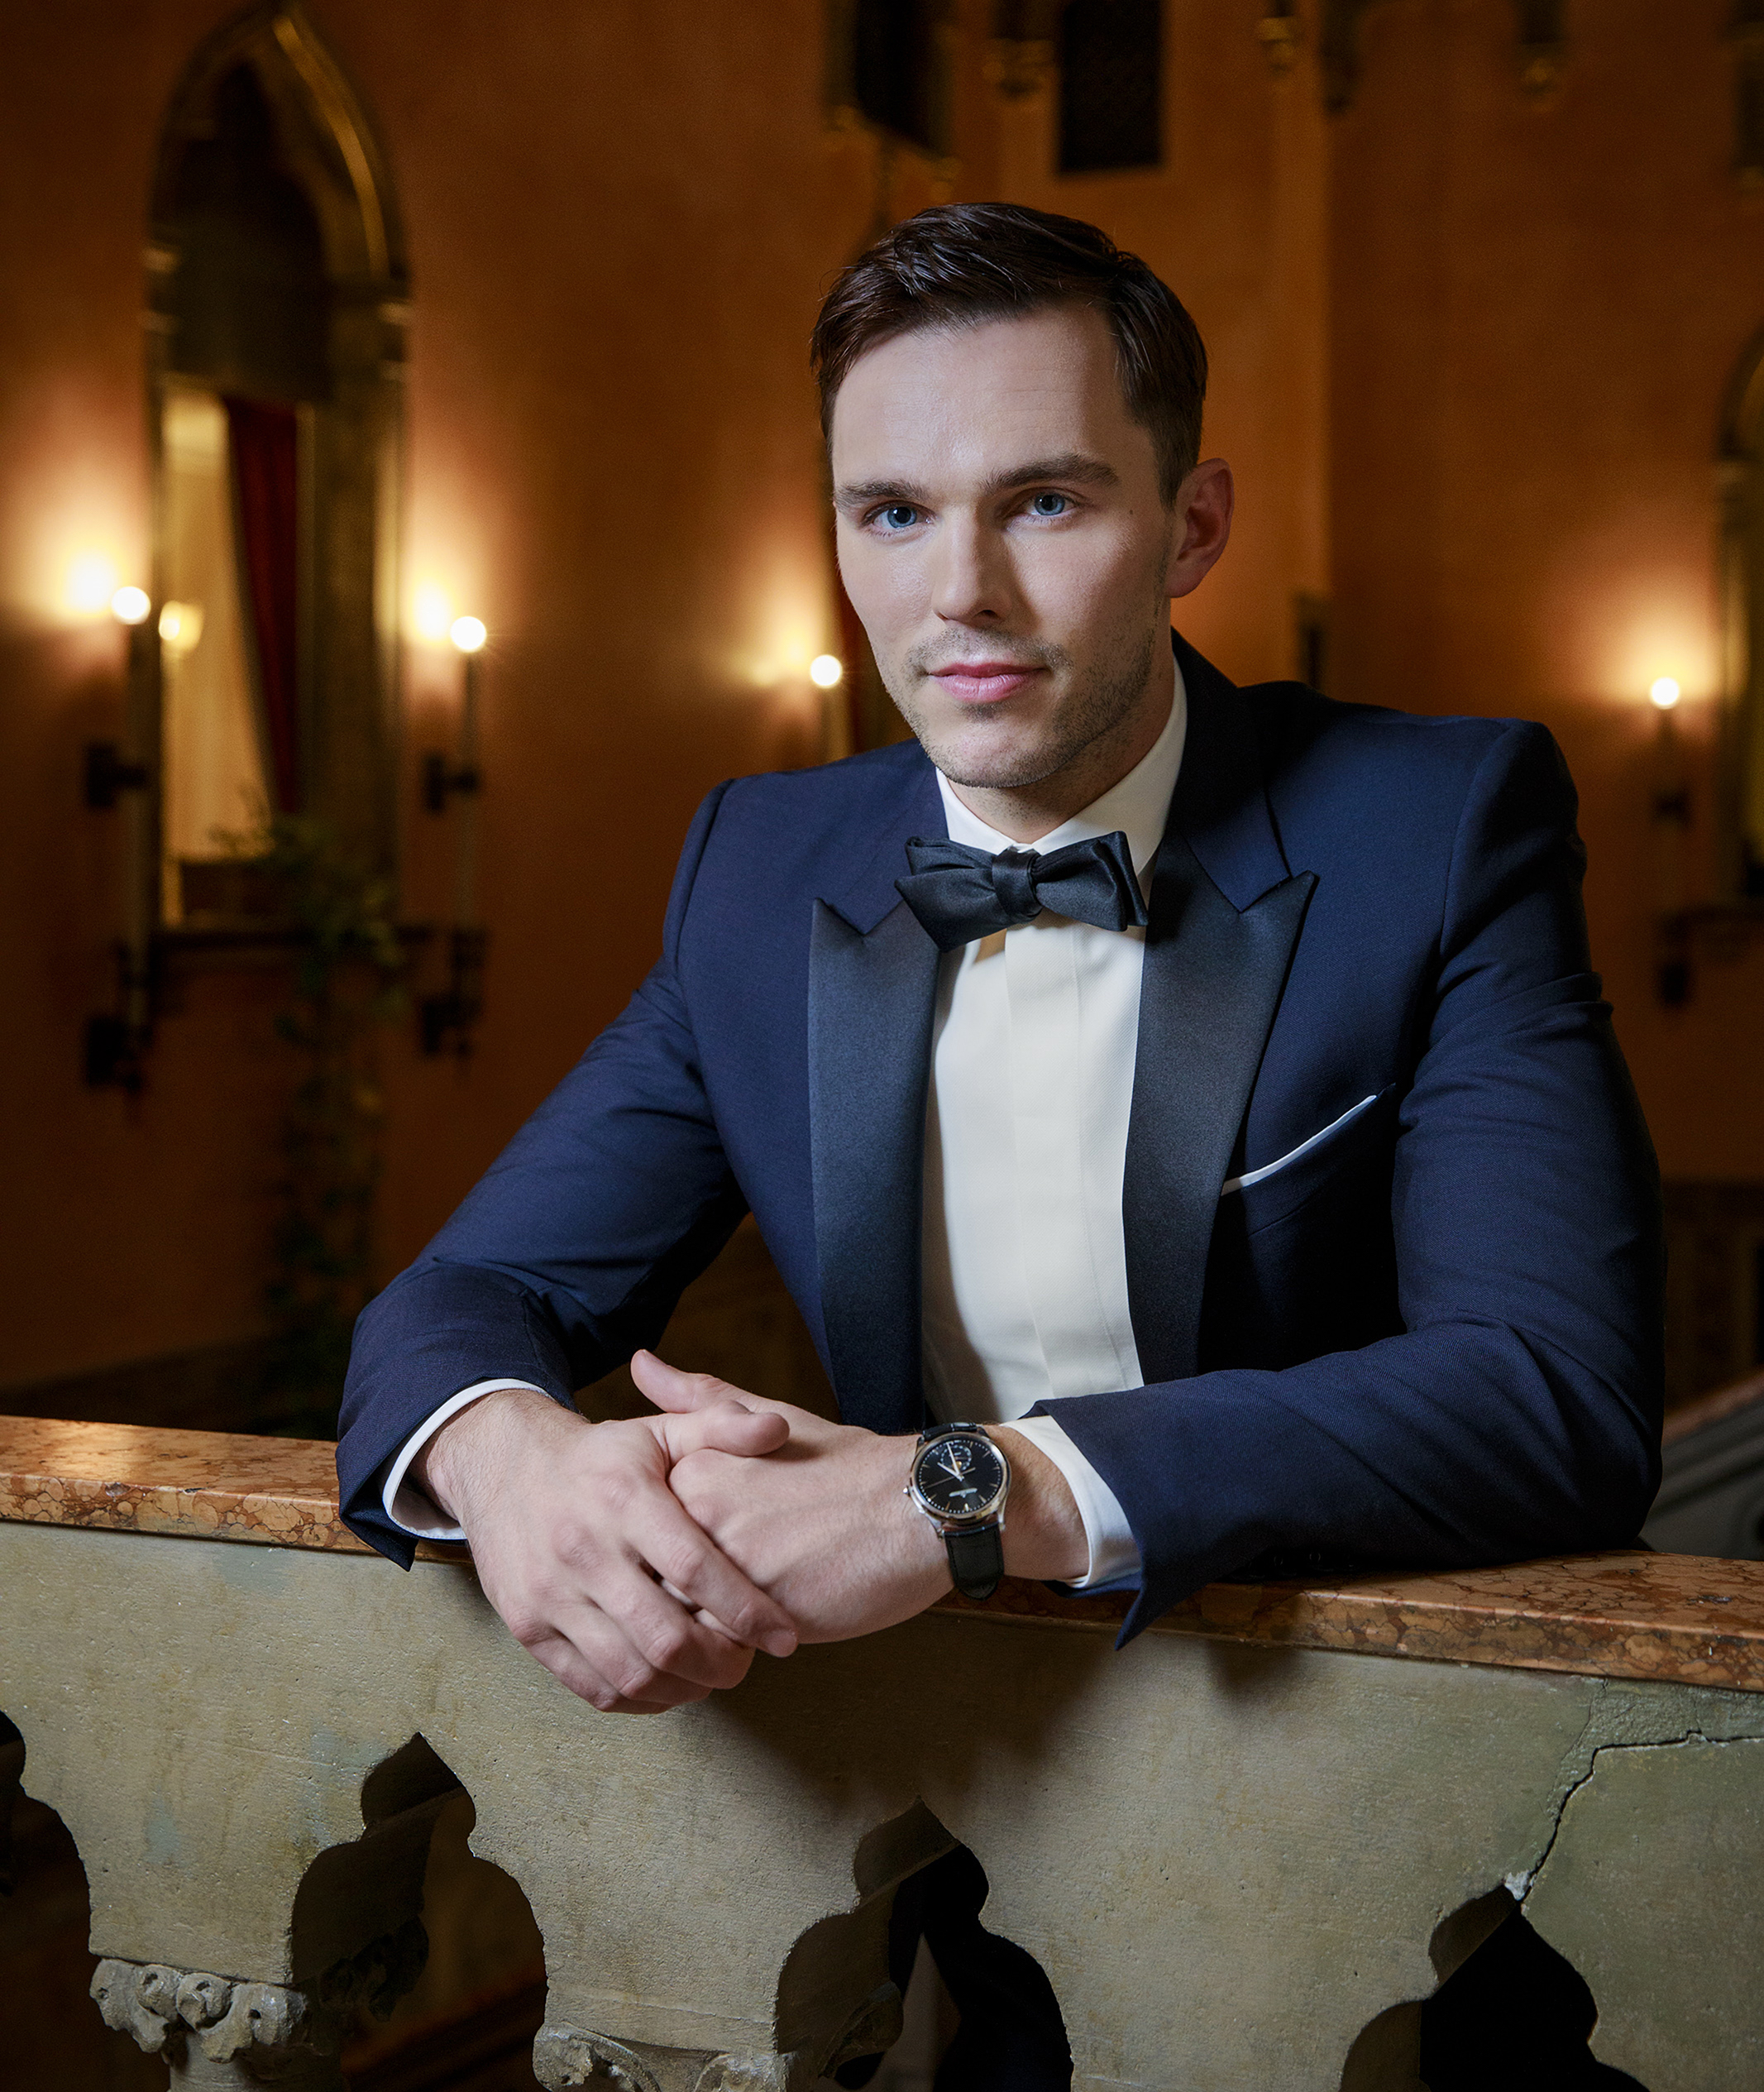 Jaeger-LeCoultre is Thrilled to Welcome Actors Nicholas Hoult and Daniel Bruehl to SIHH 2019